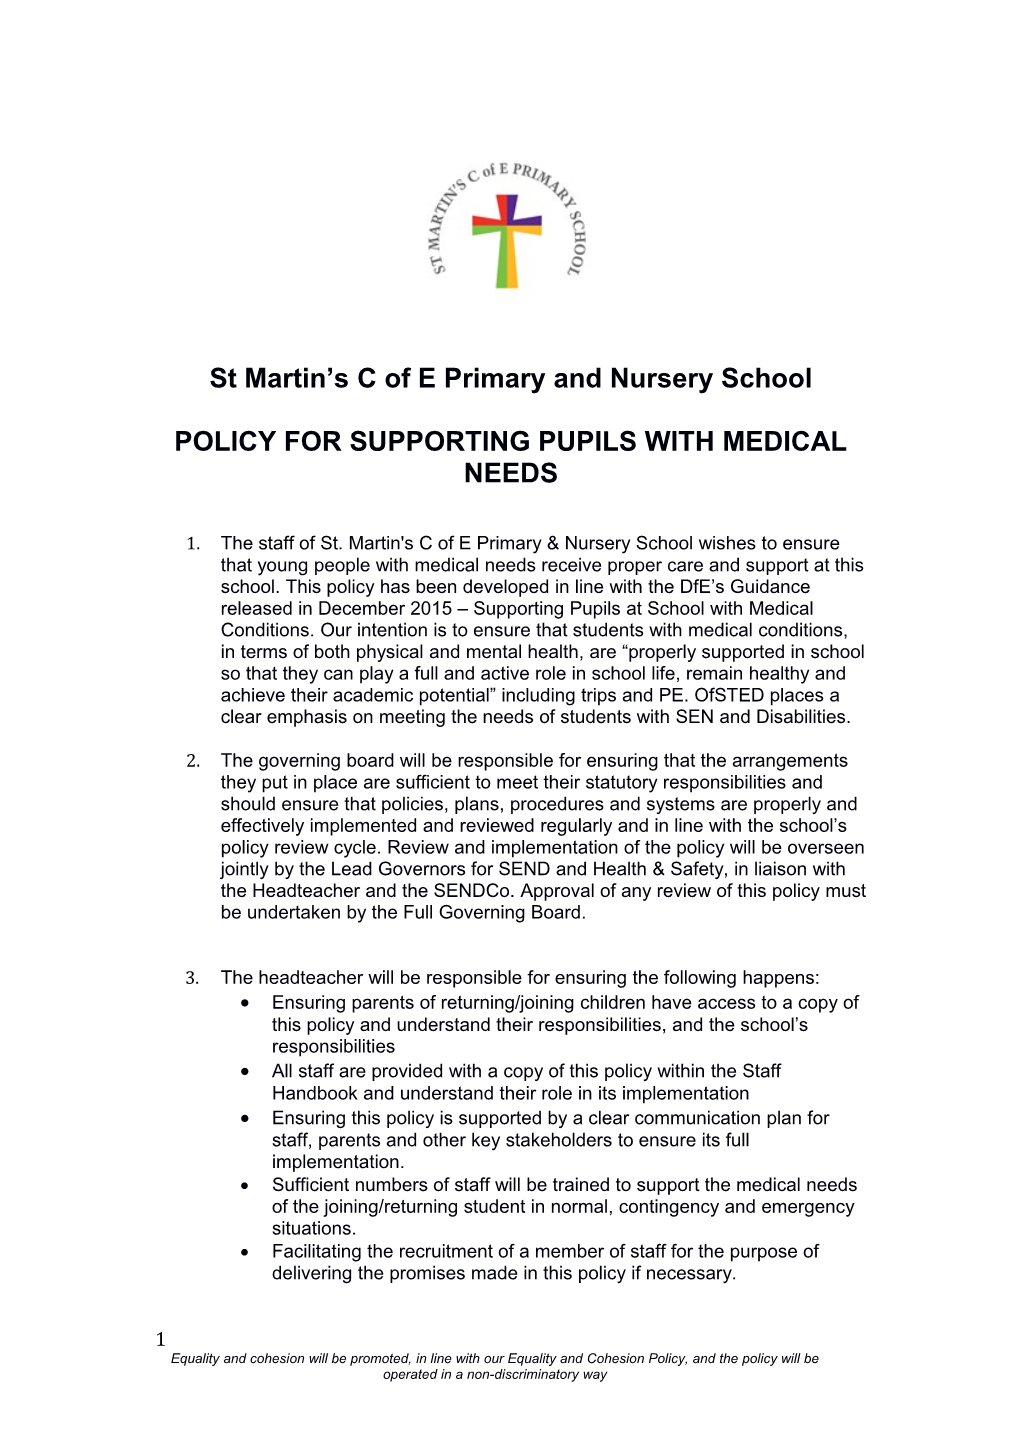 Policy for Supporting Pupils with Medical Needs